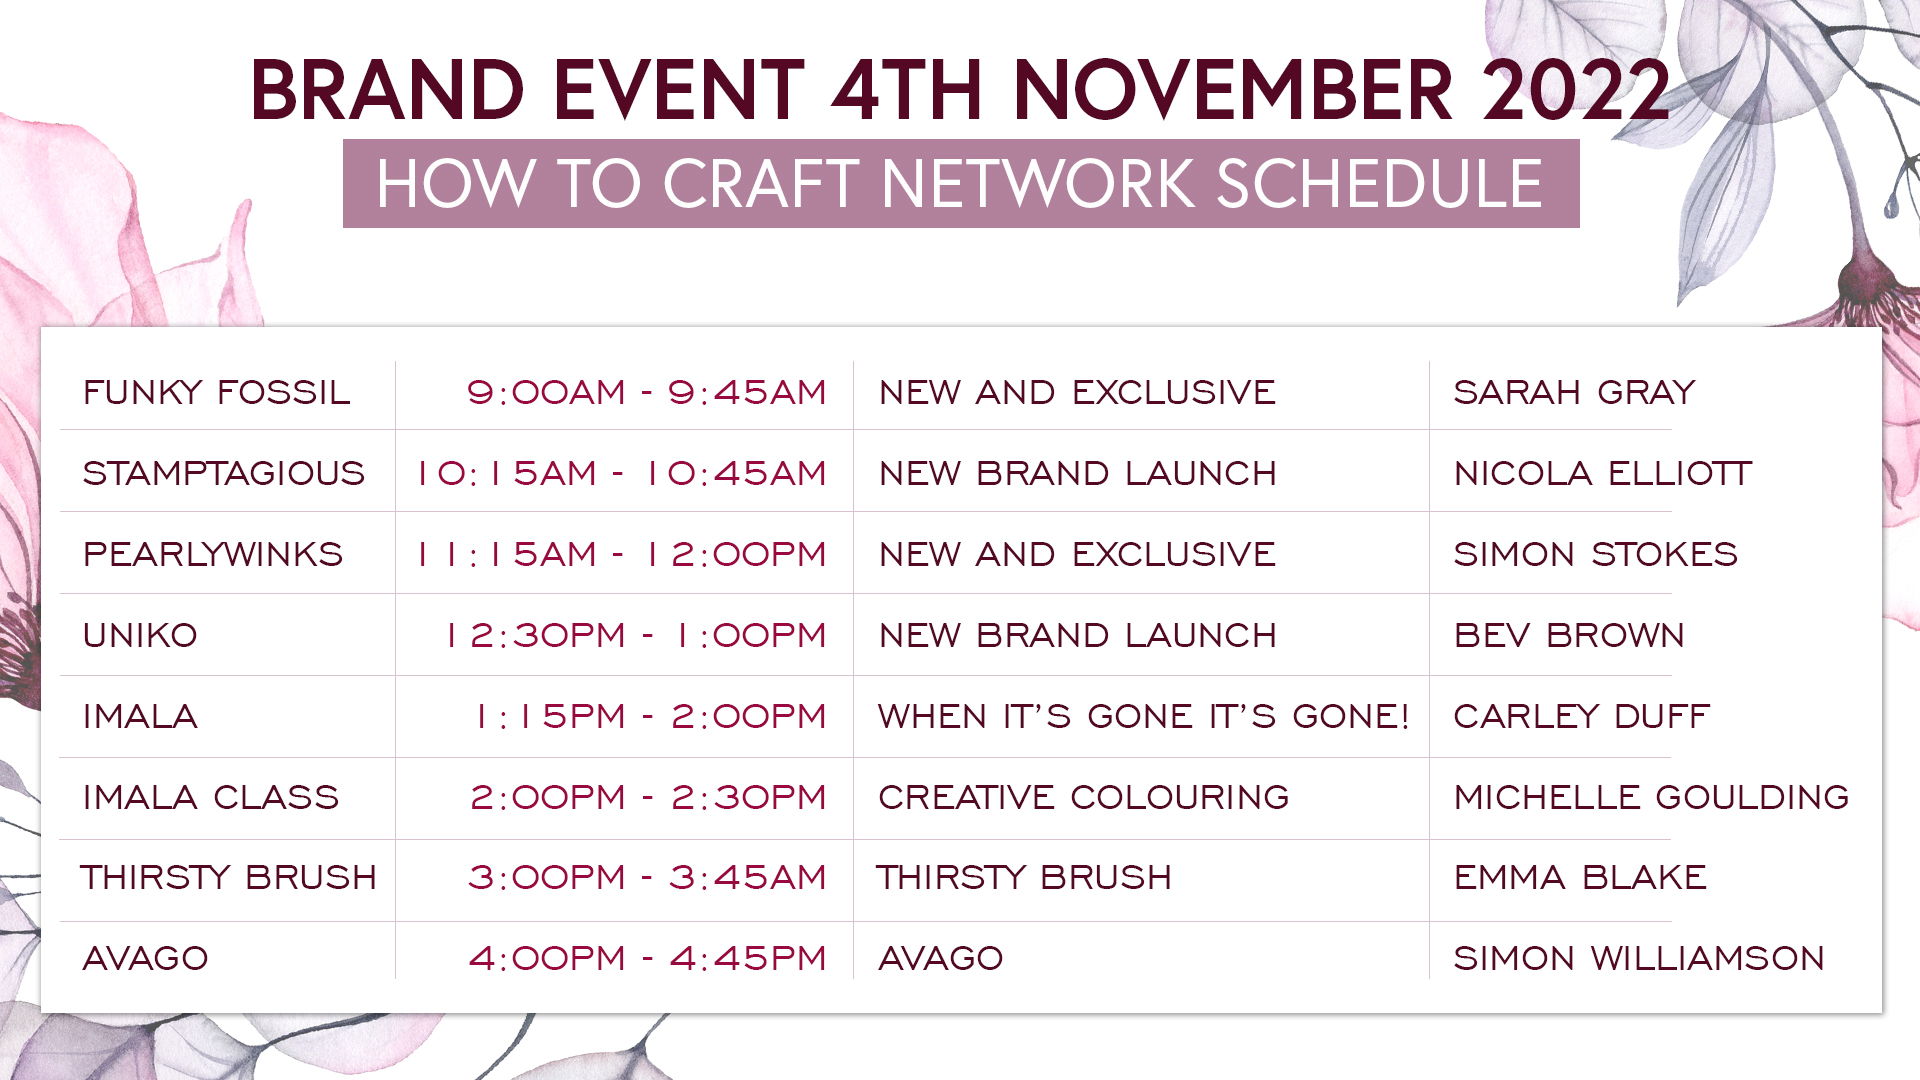 brand-showcase---imala-free-coloring-class---join-us-for-this-much-loved-event-where-the-small-brands-get-to-shout-loudest---broadcast-4th-nov-22